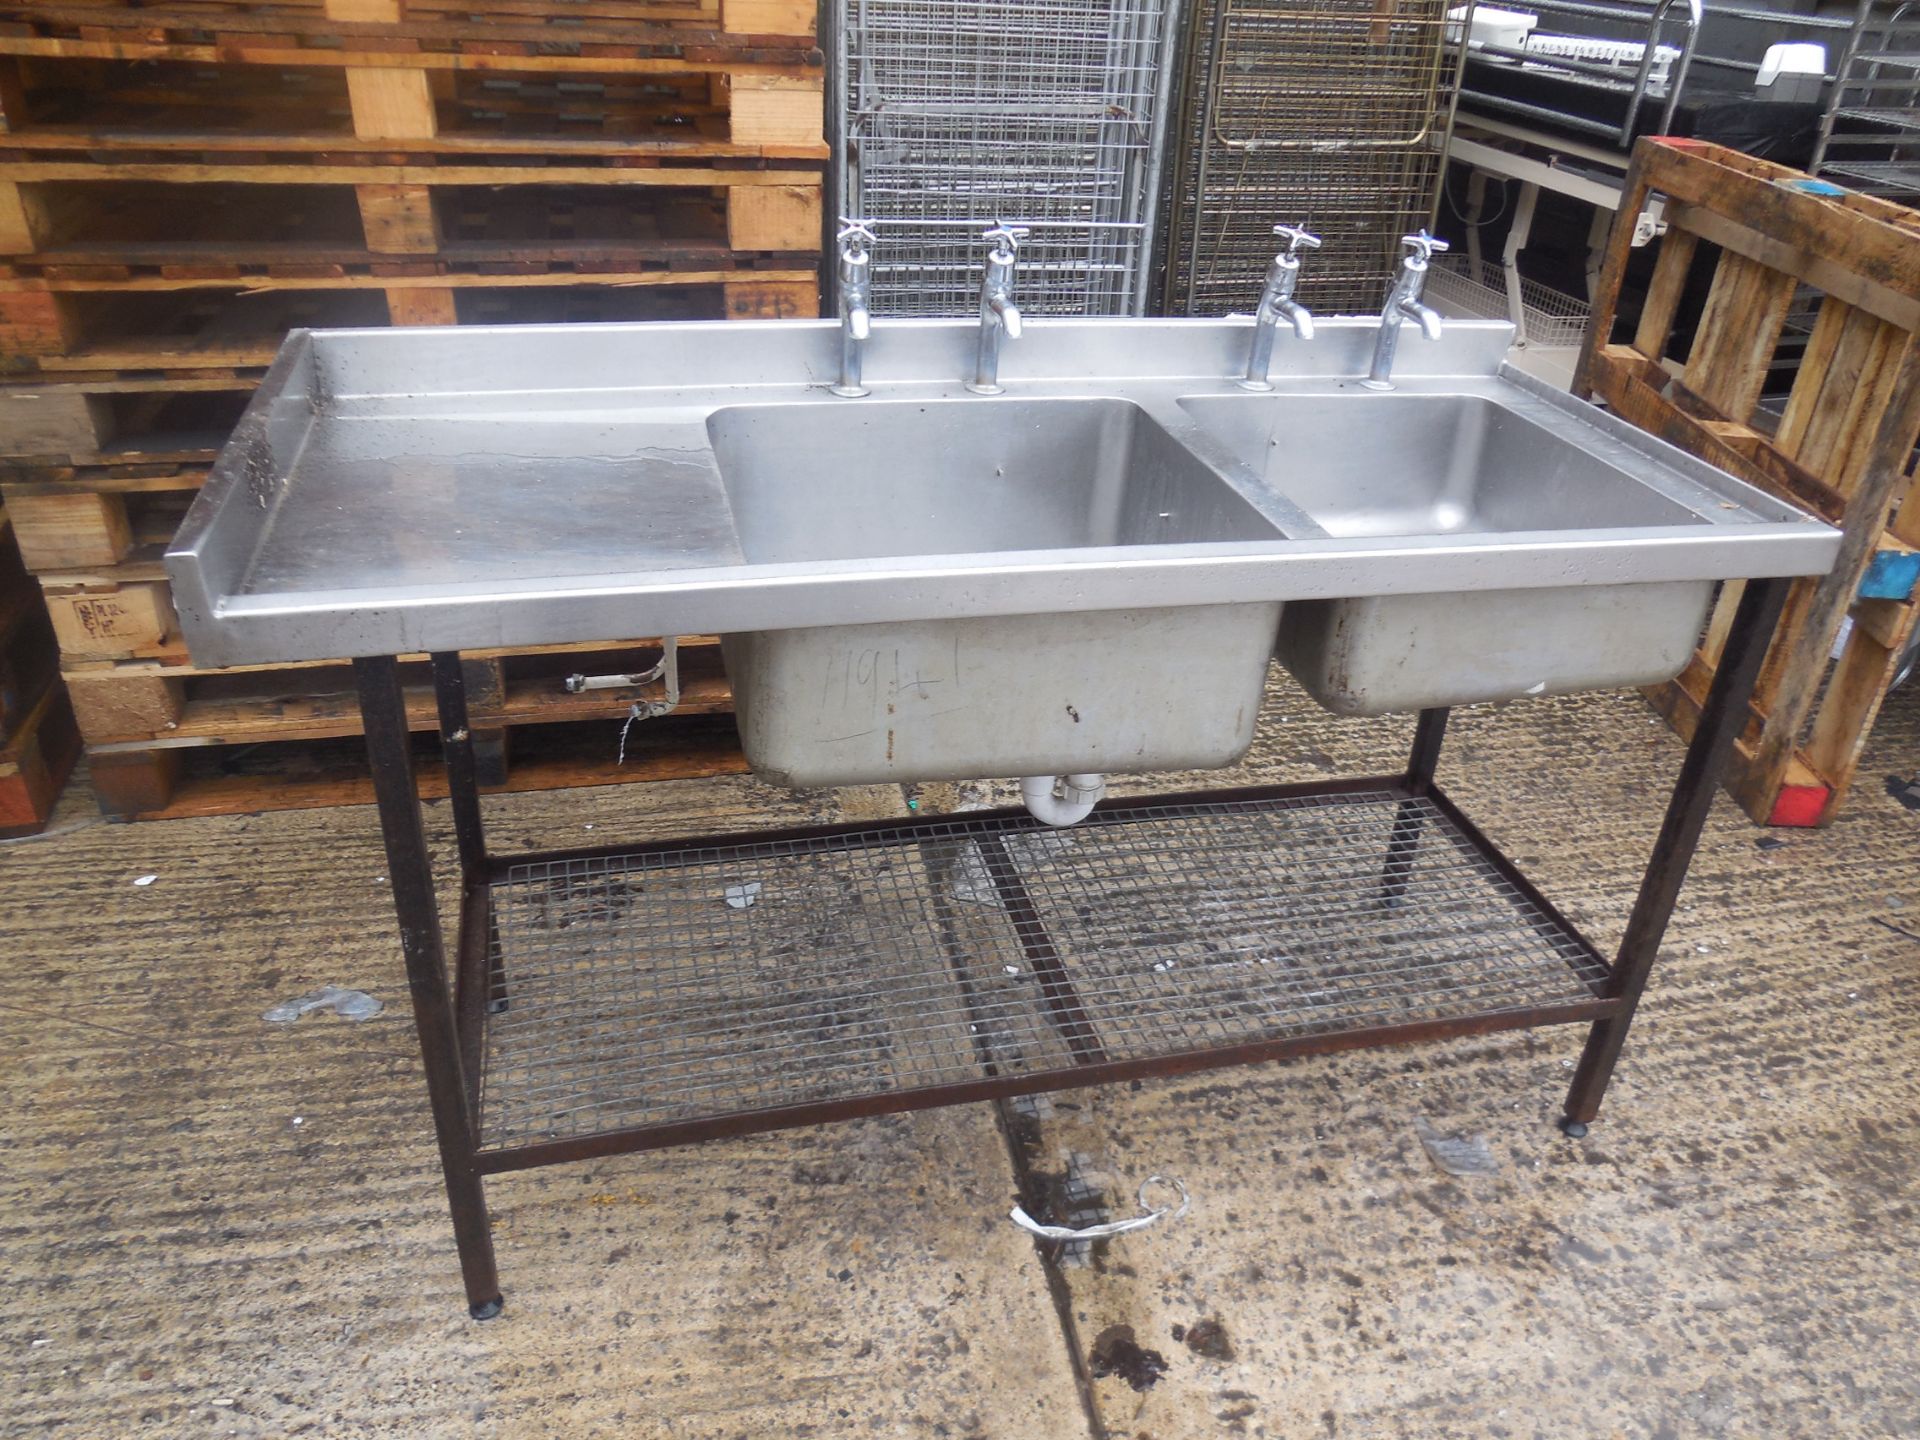 5ft Stainless Steel Top Double Bowl Left Hand Drainer Sink with Steel Legs